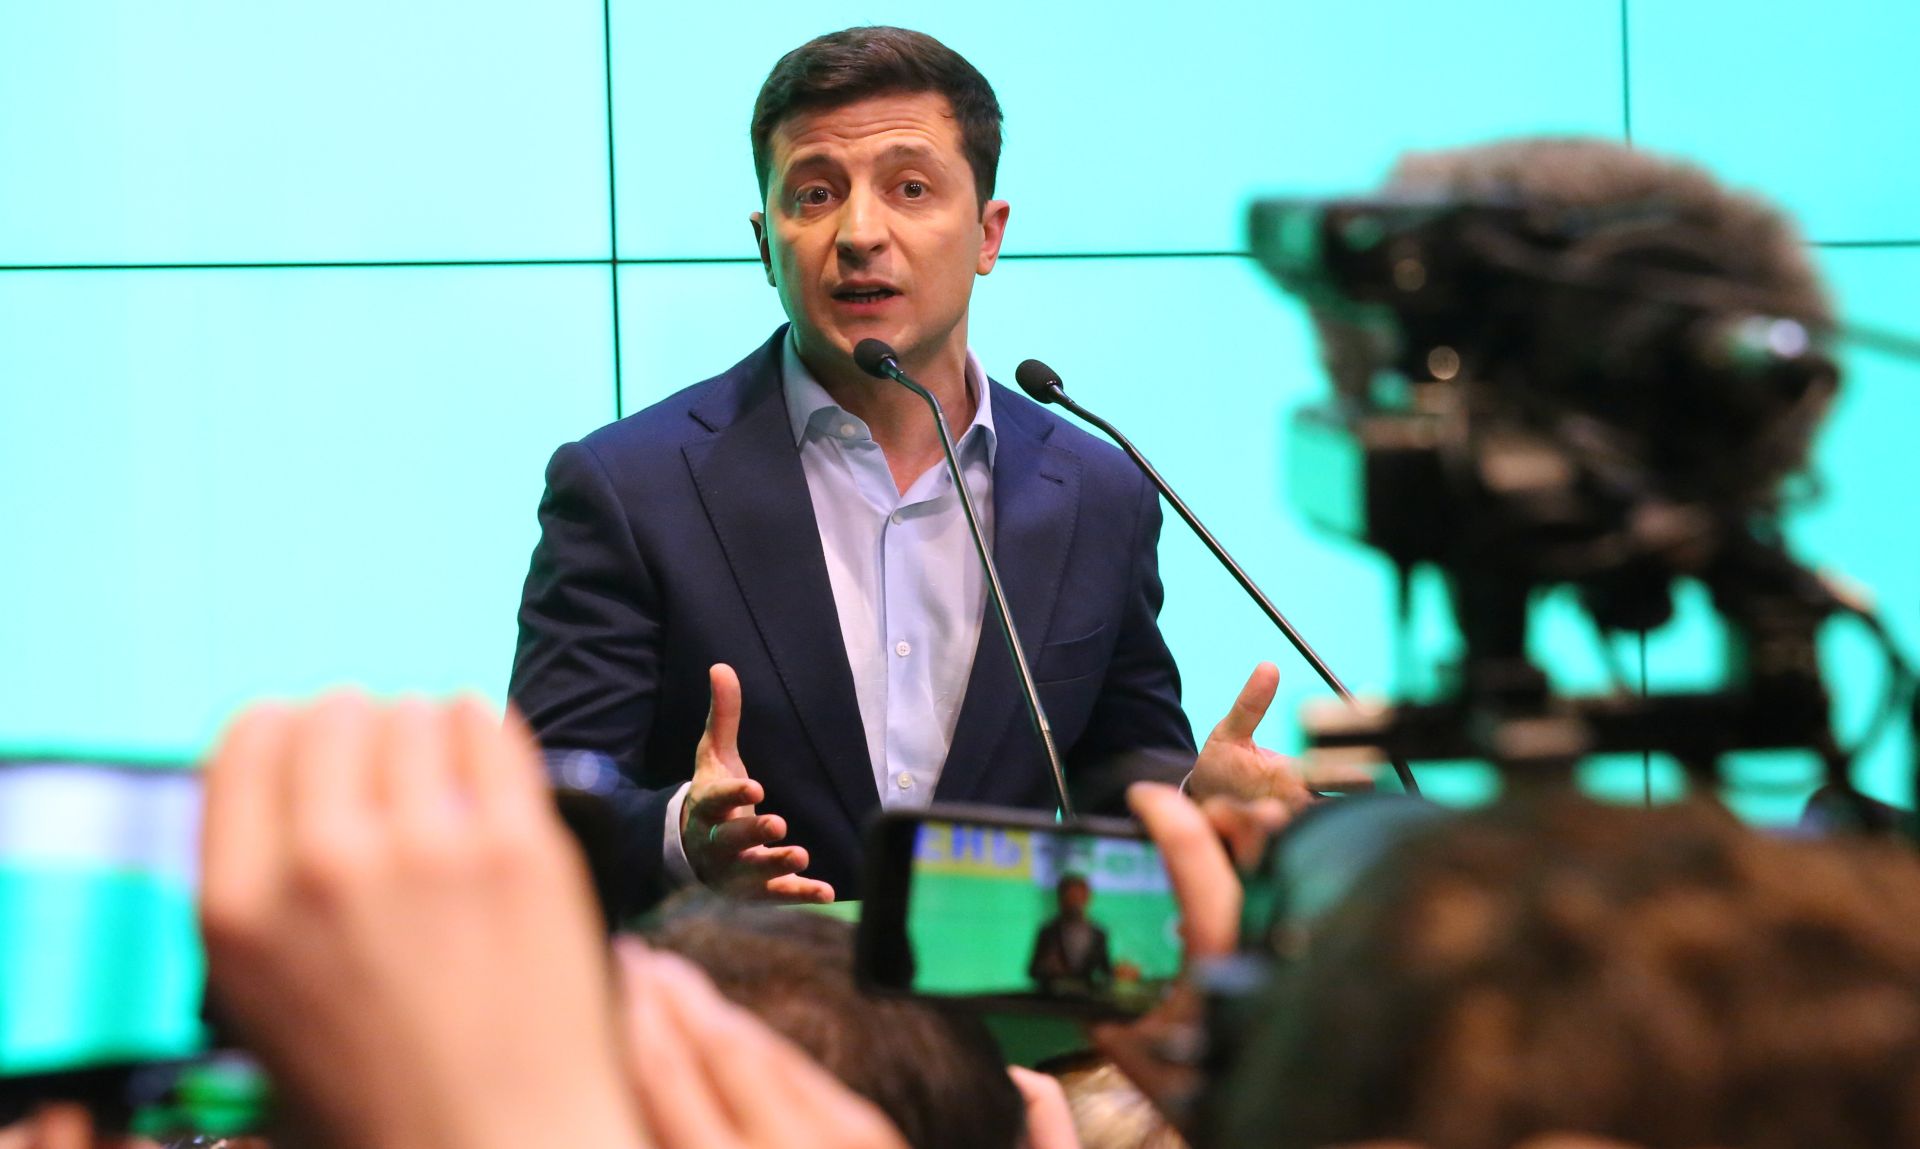 epa07520524 Ukrainian Presidential candidate Volodymyr Zelensky talks to media at the briefing after the announcement of exit-poll during the Ukrainian presidential elections in Kiev, Ukraine, 21 April 2019. Ukrainians voted during the second round of Presidential elections on 21 April 2019. Some 73.2 percent of voters supported presidential candidate Volodymyr Zelensky, while 25.3 percent voted for incumbent President Petro Poroshenko, according to results of the National Exit Poll 2019 project as of 18:00 Kiev time, an local media report.  EPA/TATYANA ZENKOVICH